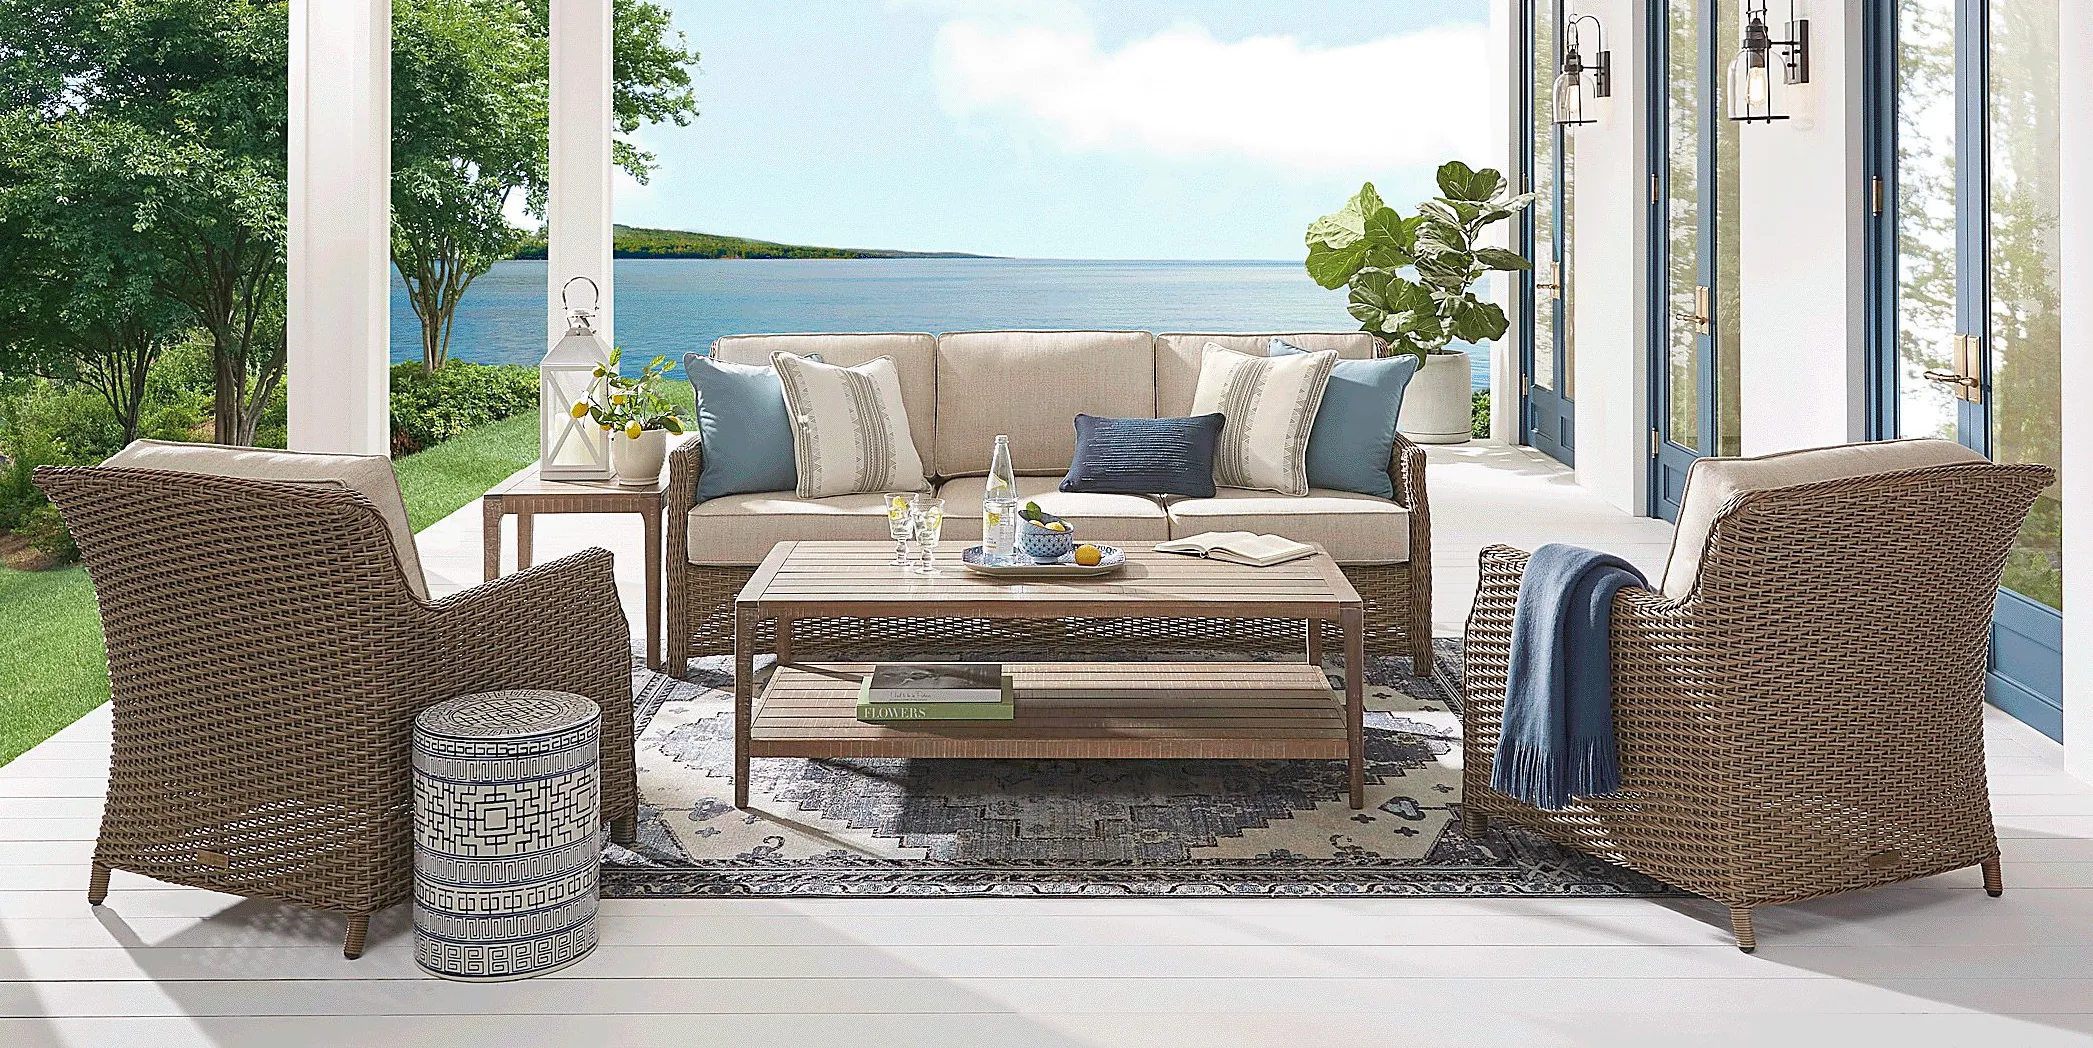 Ridgecrest Gray 4 pc Outdoor Sofa Seating Set With Pebble Cushions